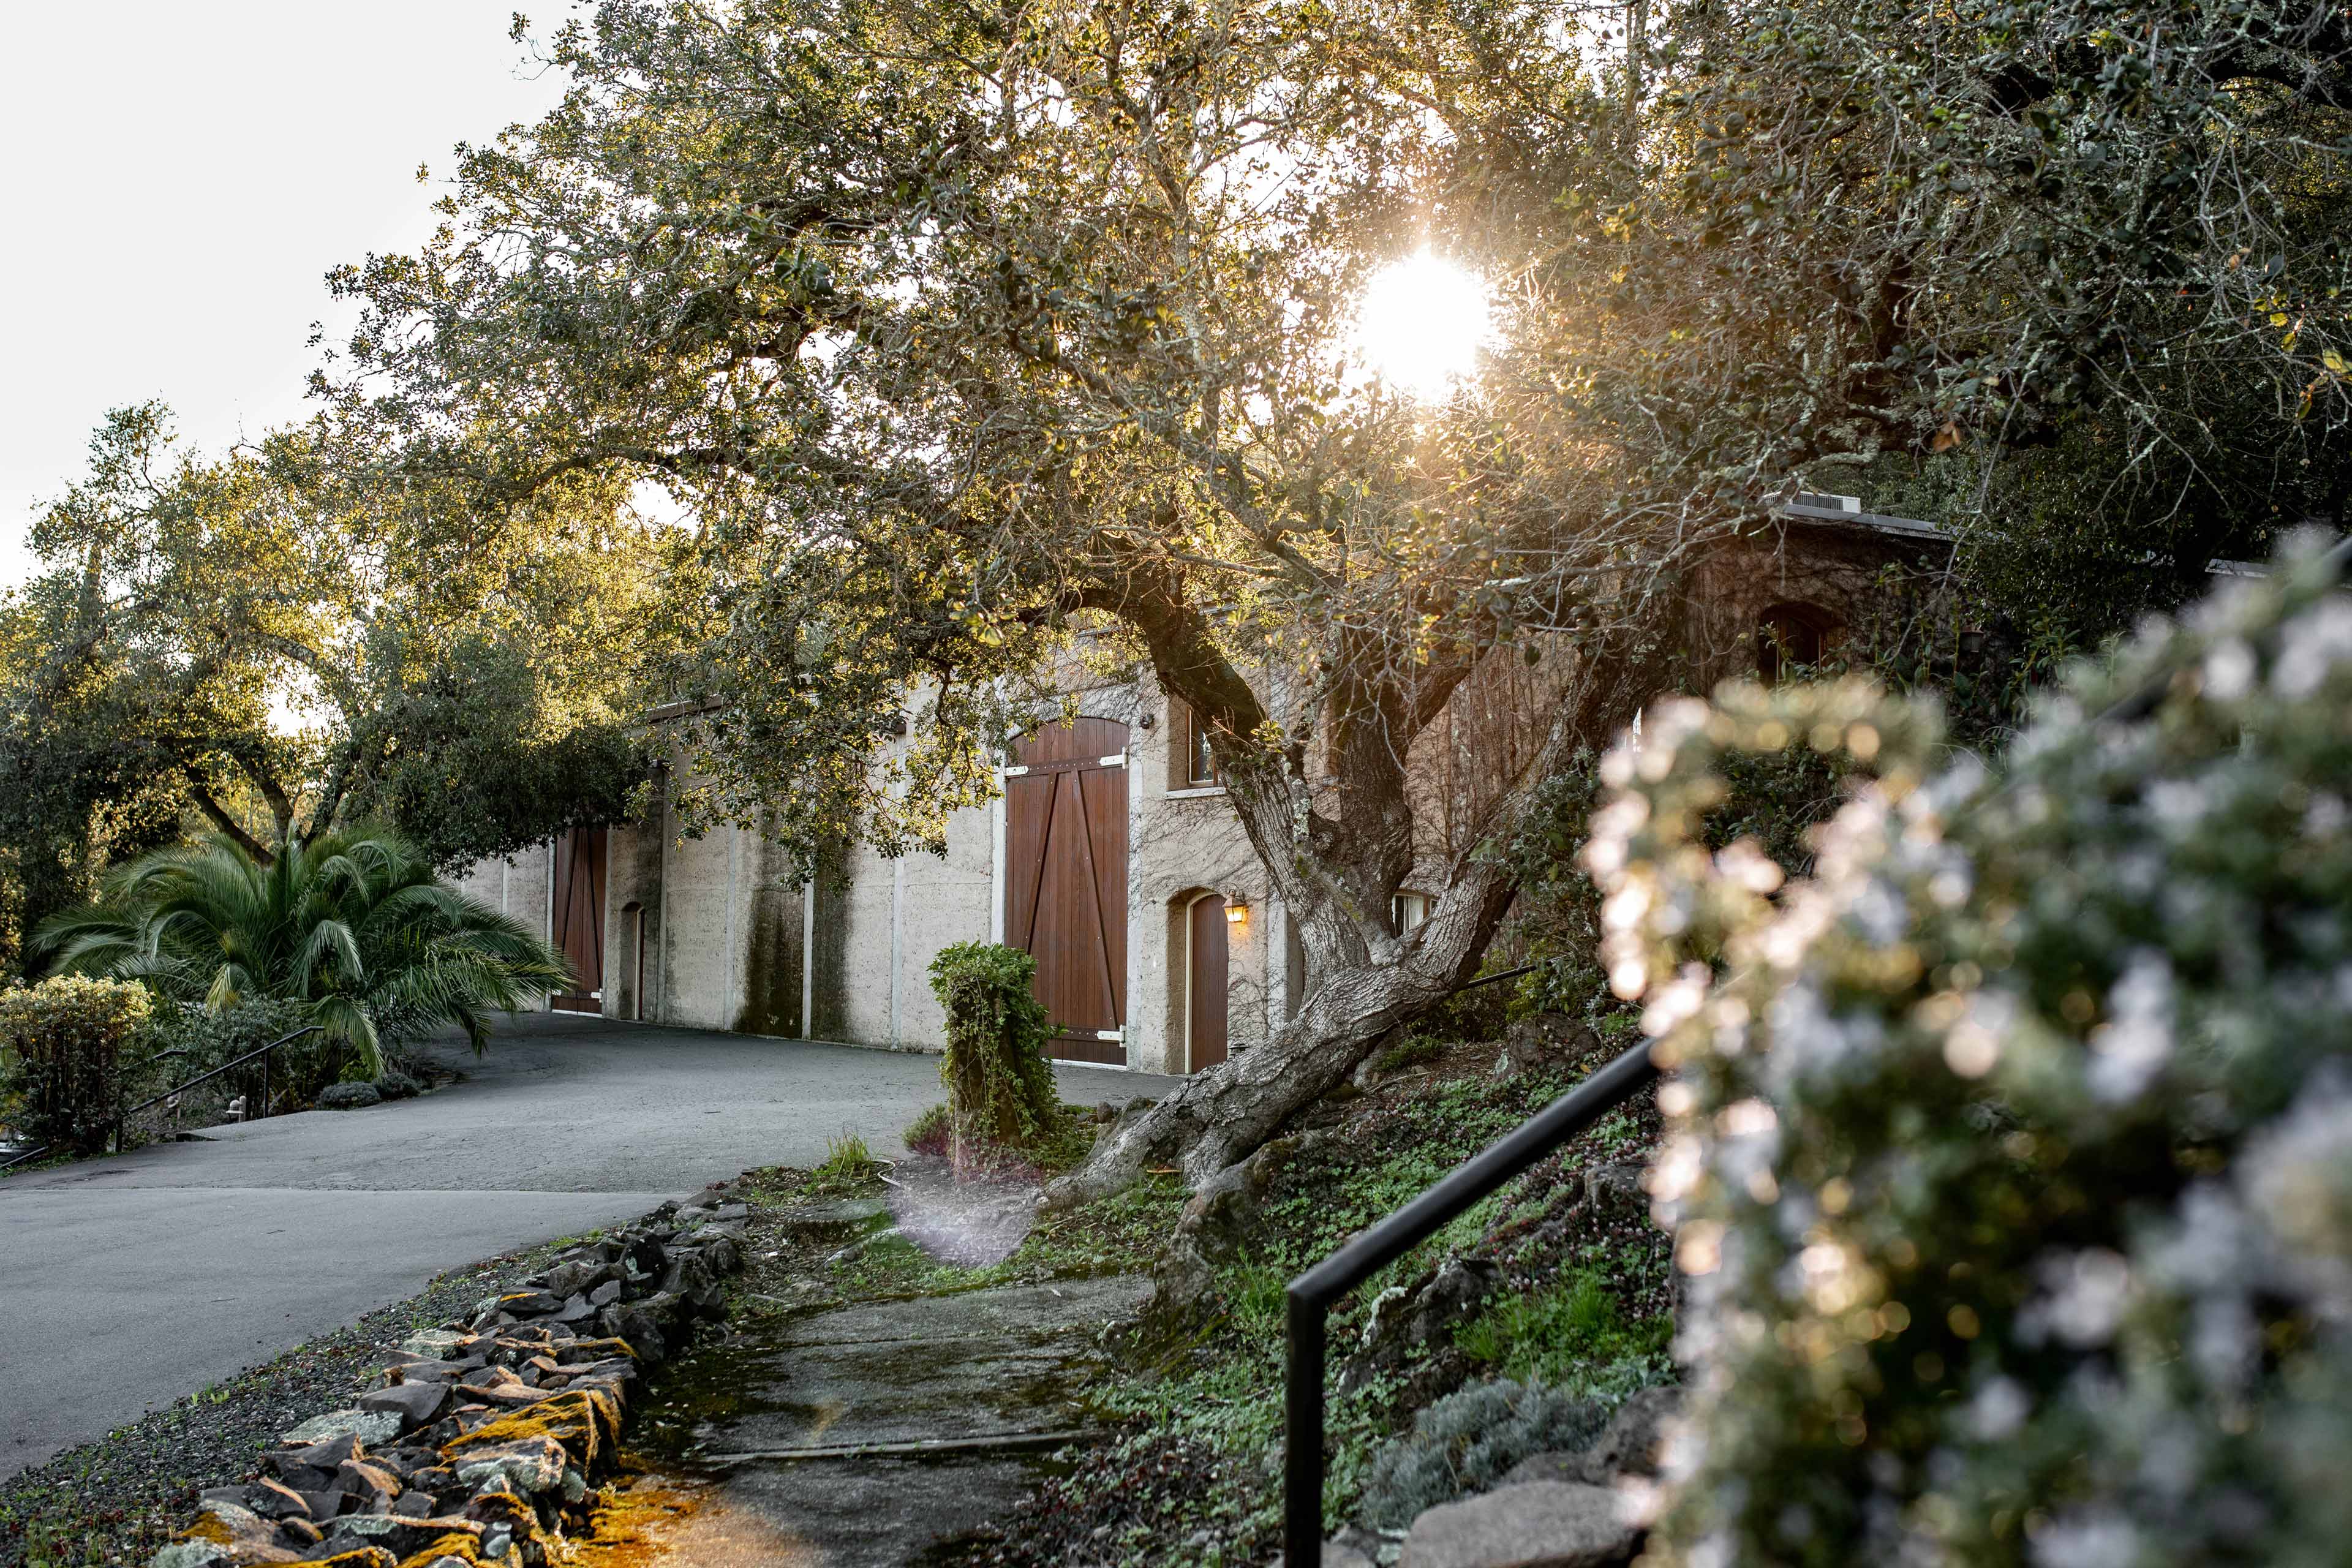 entrance of the harrow cellars winery in the heart of sonoma